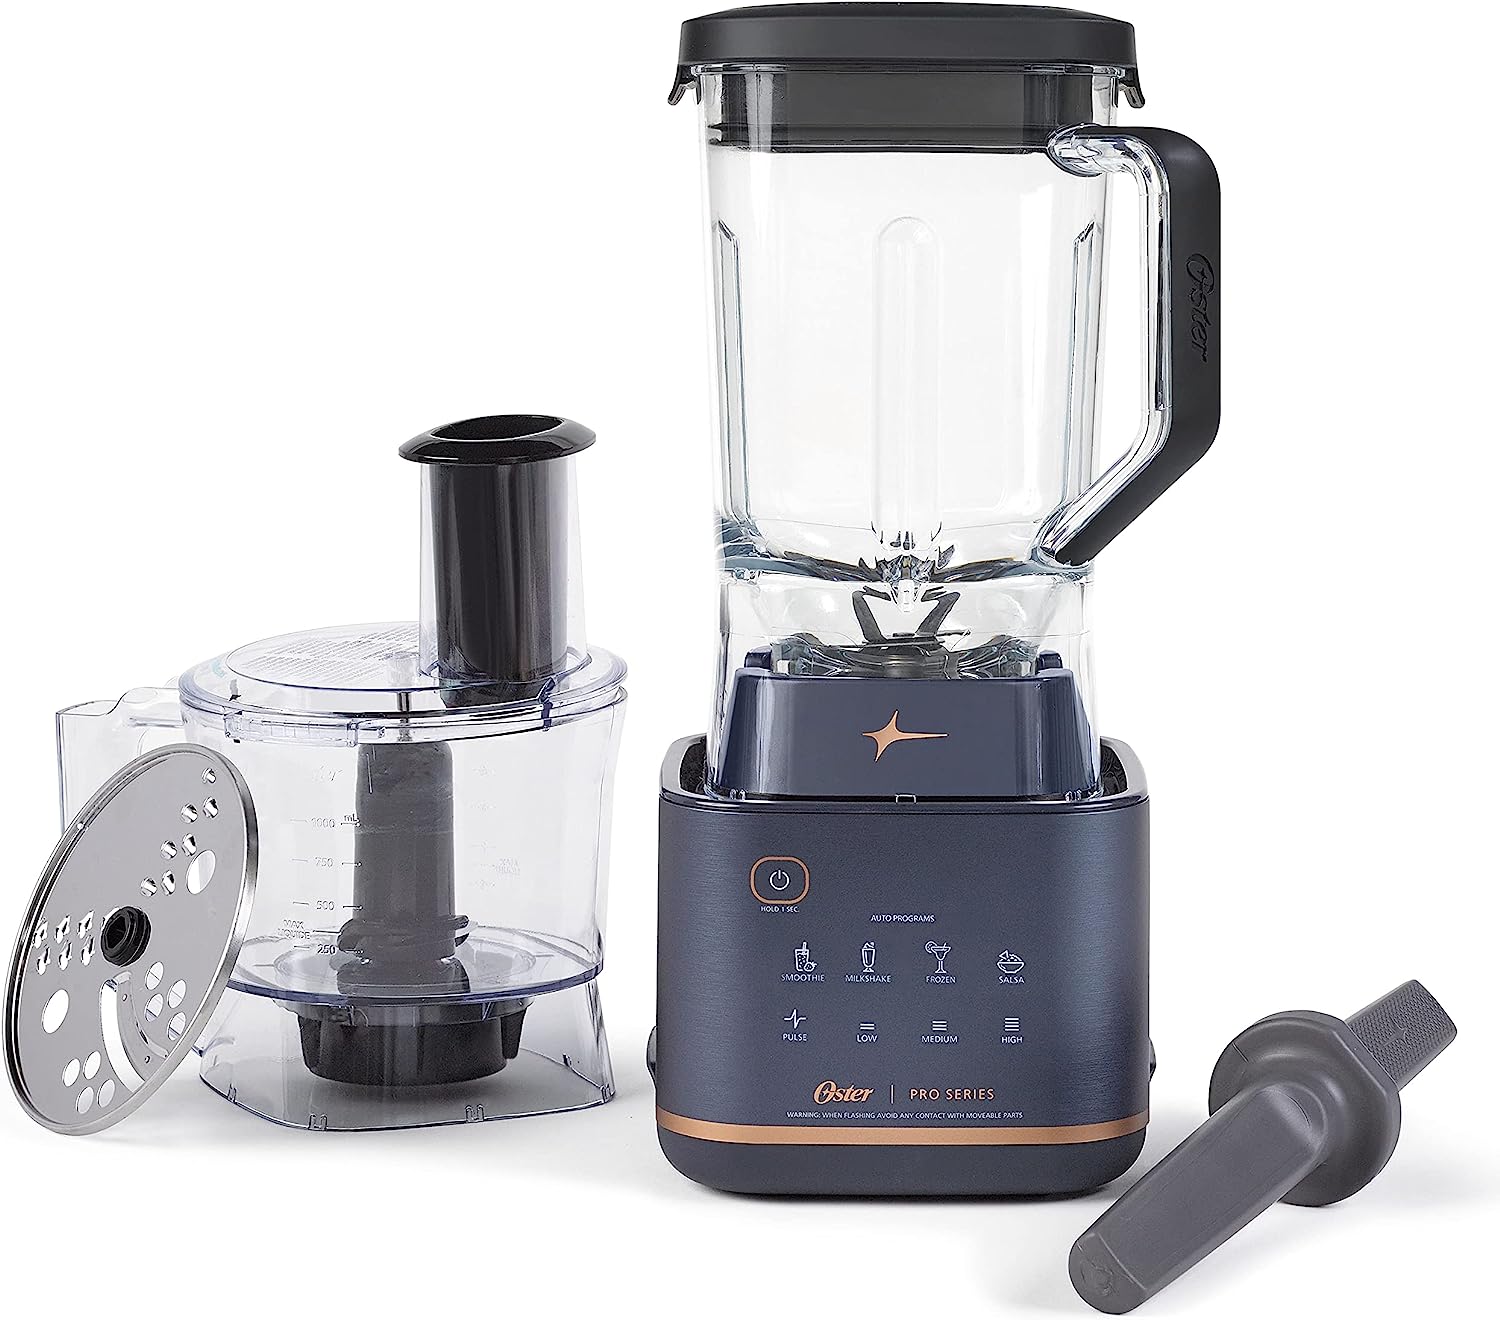  Oster 2-in-1 Kitchen System Pro Series